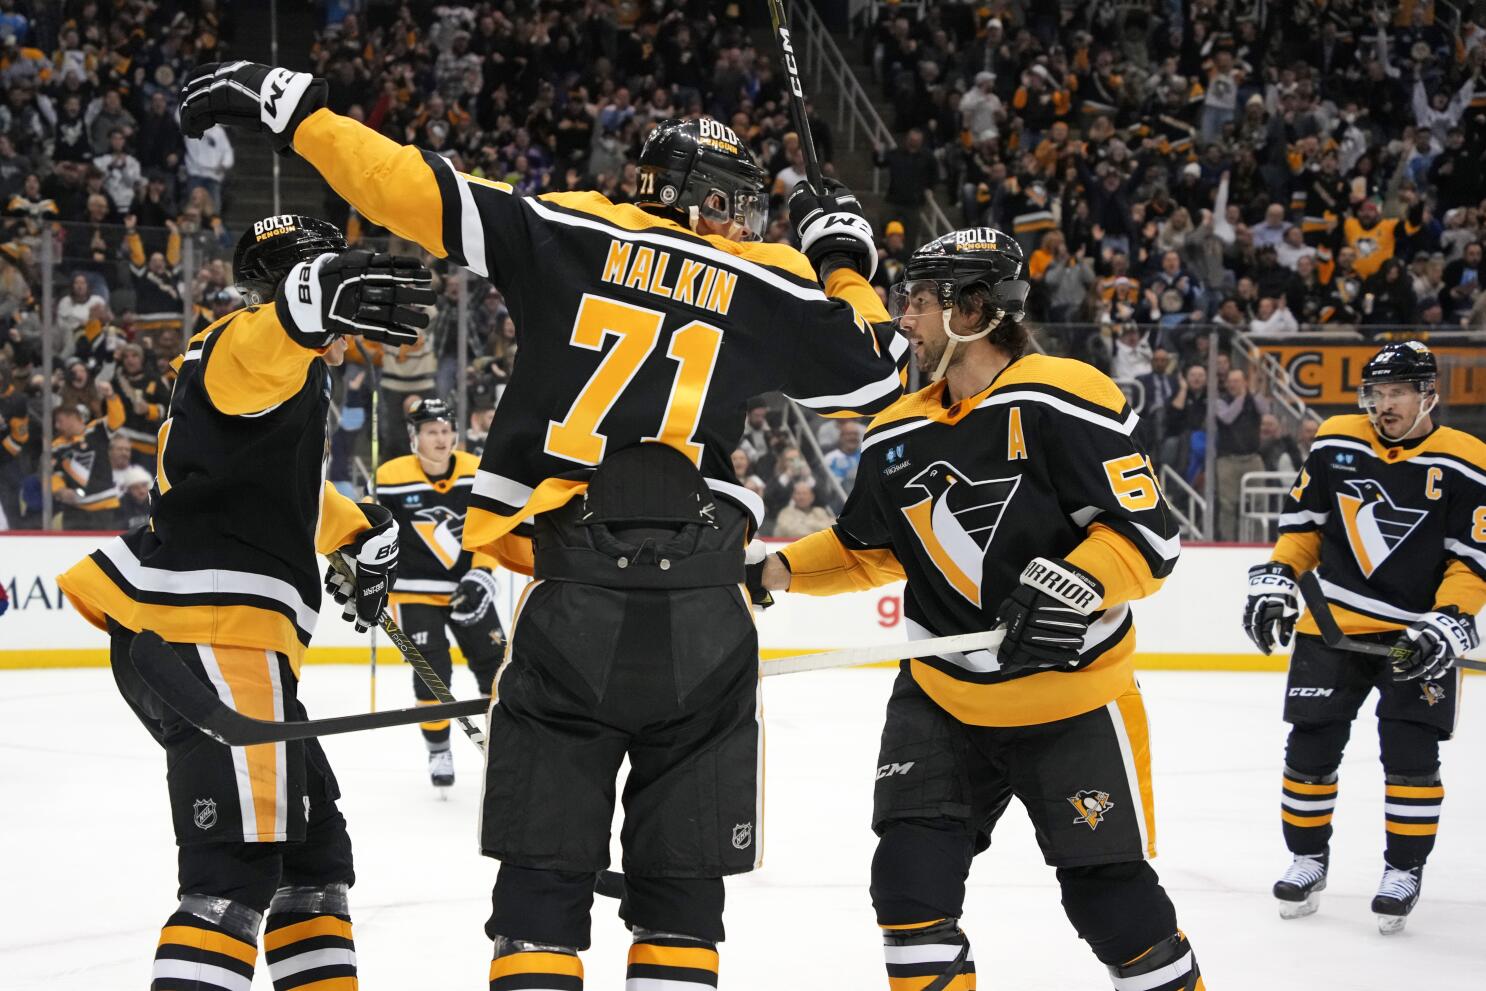 Rangers Host Penguins for the First of Two-Straight Meetings